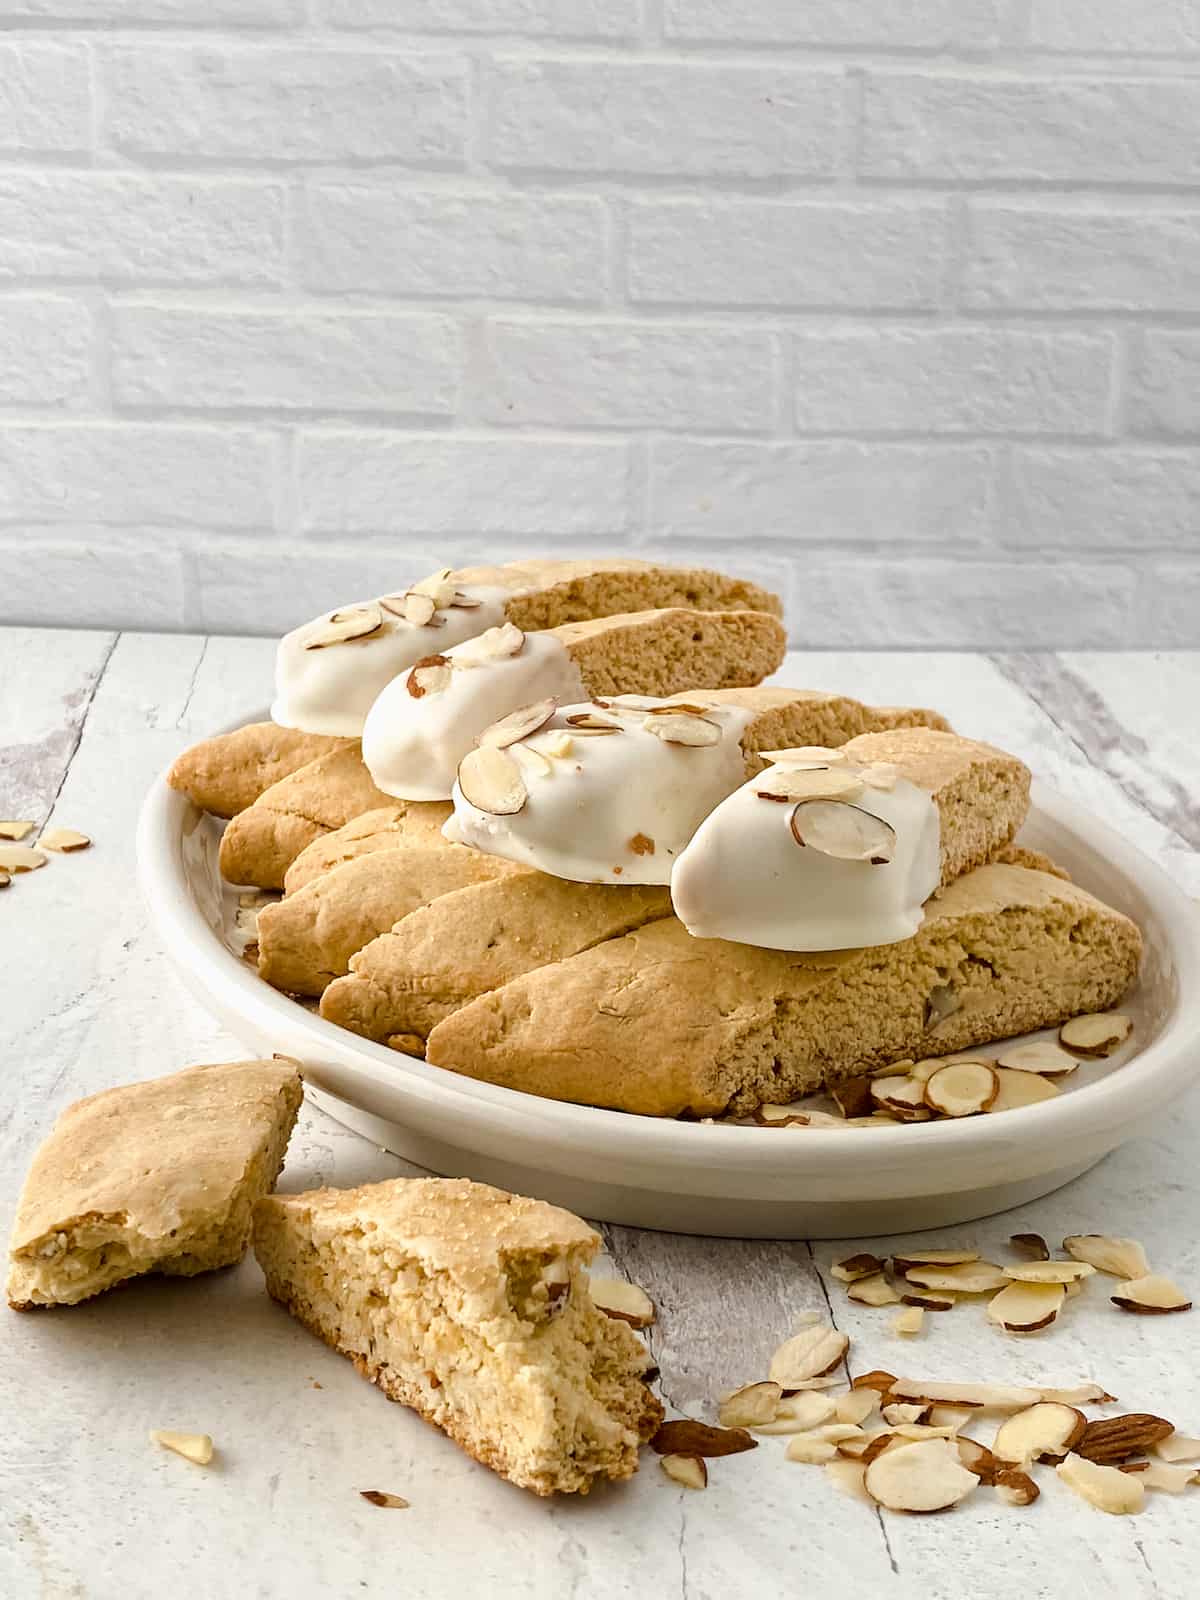 Biscotti dipped in white chocolate and almonds on a white table.